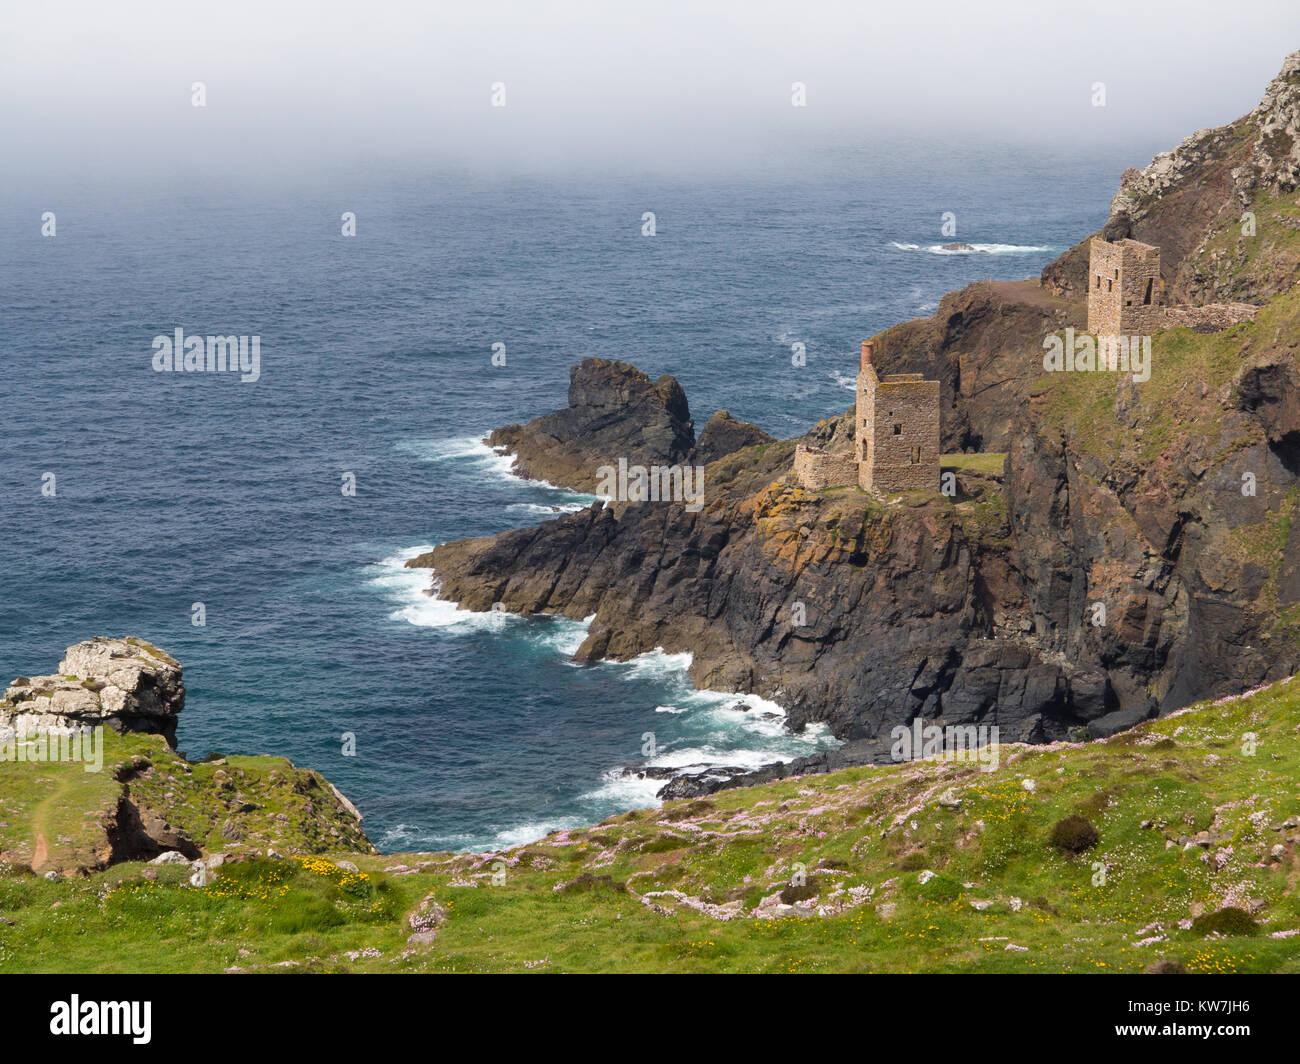 Stone buildings nestled in a cliff face looking out over the Atlantic Ocean, Cornwall Stock Photo